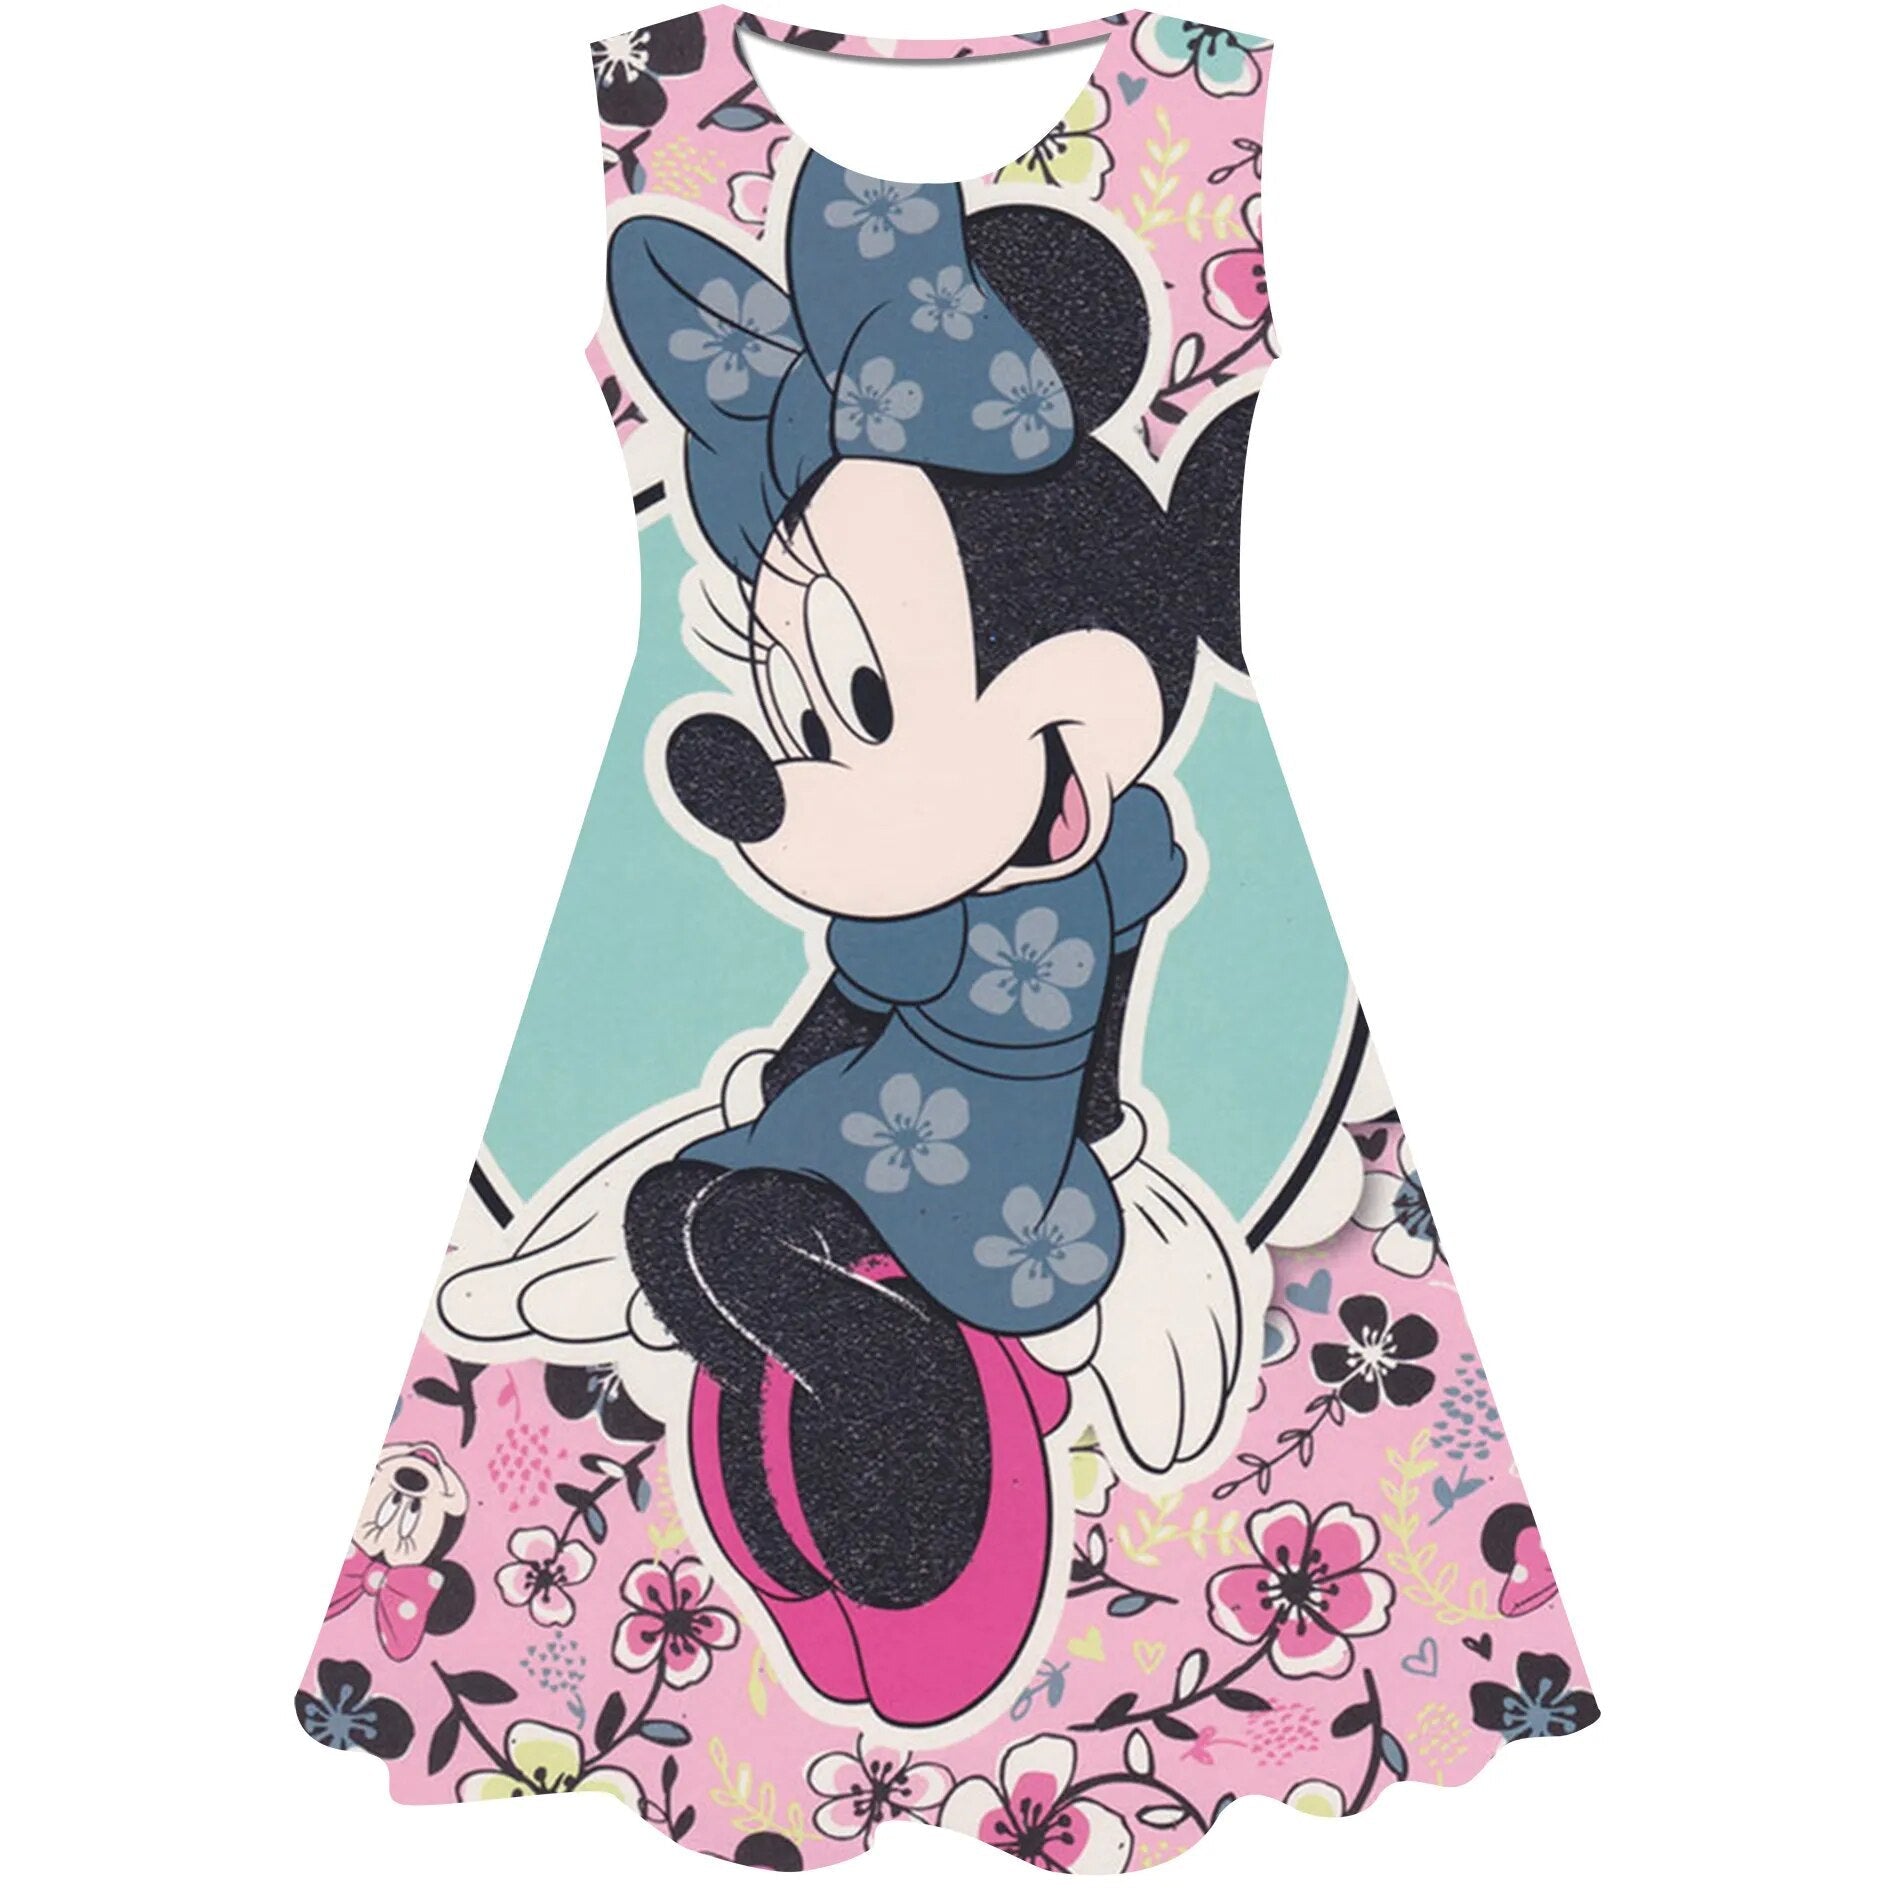 Minnie Mouse Dress Baby Girls Dresses Birthday Outfit Dresses Girl Costume For Kids Party Disney Series Skirt Clothes 1 10 Years - منصة بي مارت للتسوق الإلكترونيMinnie Mouse Dress Baby Girls Dresses Birthday Outfit Dresses Girl Costume For Kids Party Disney Series Skirt Clothes 1 10 Years